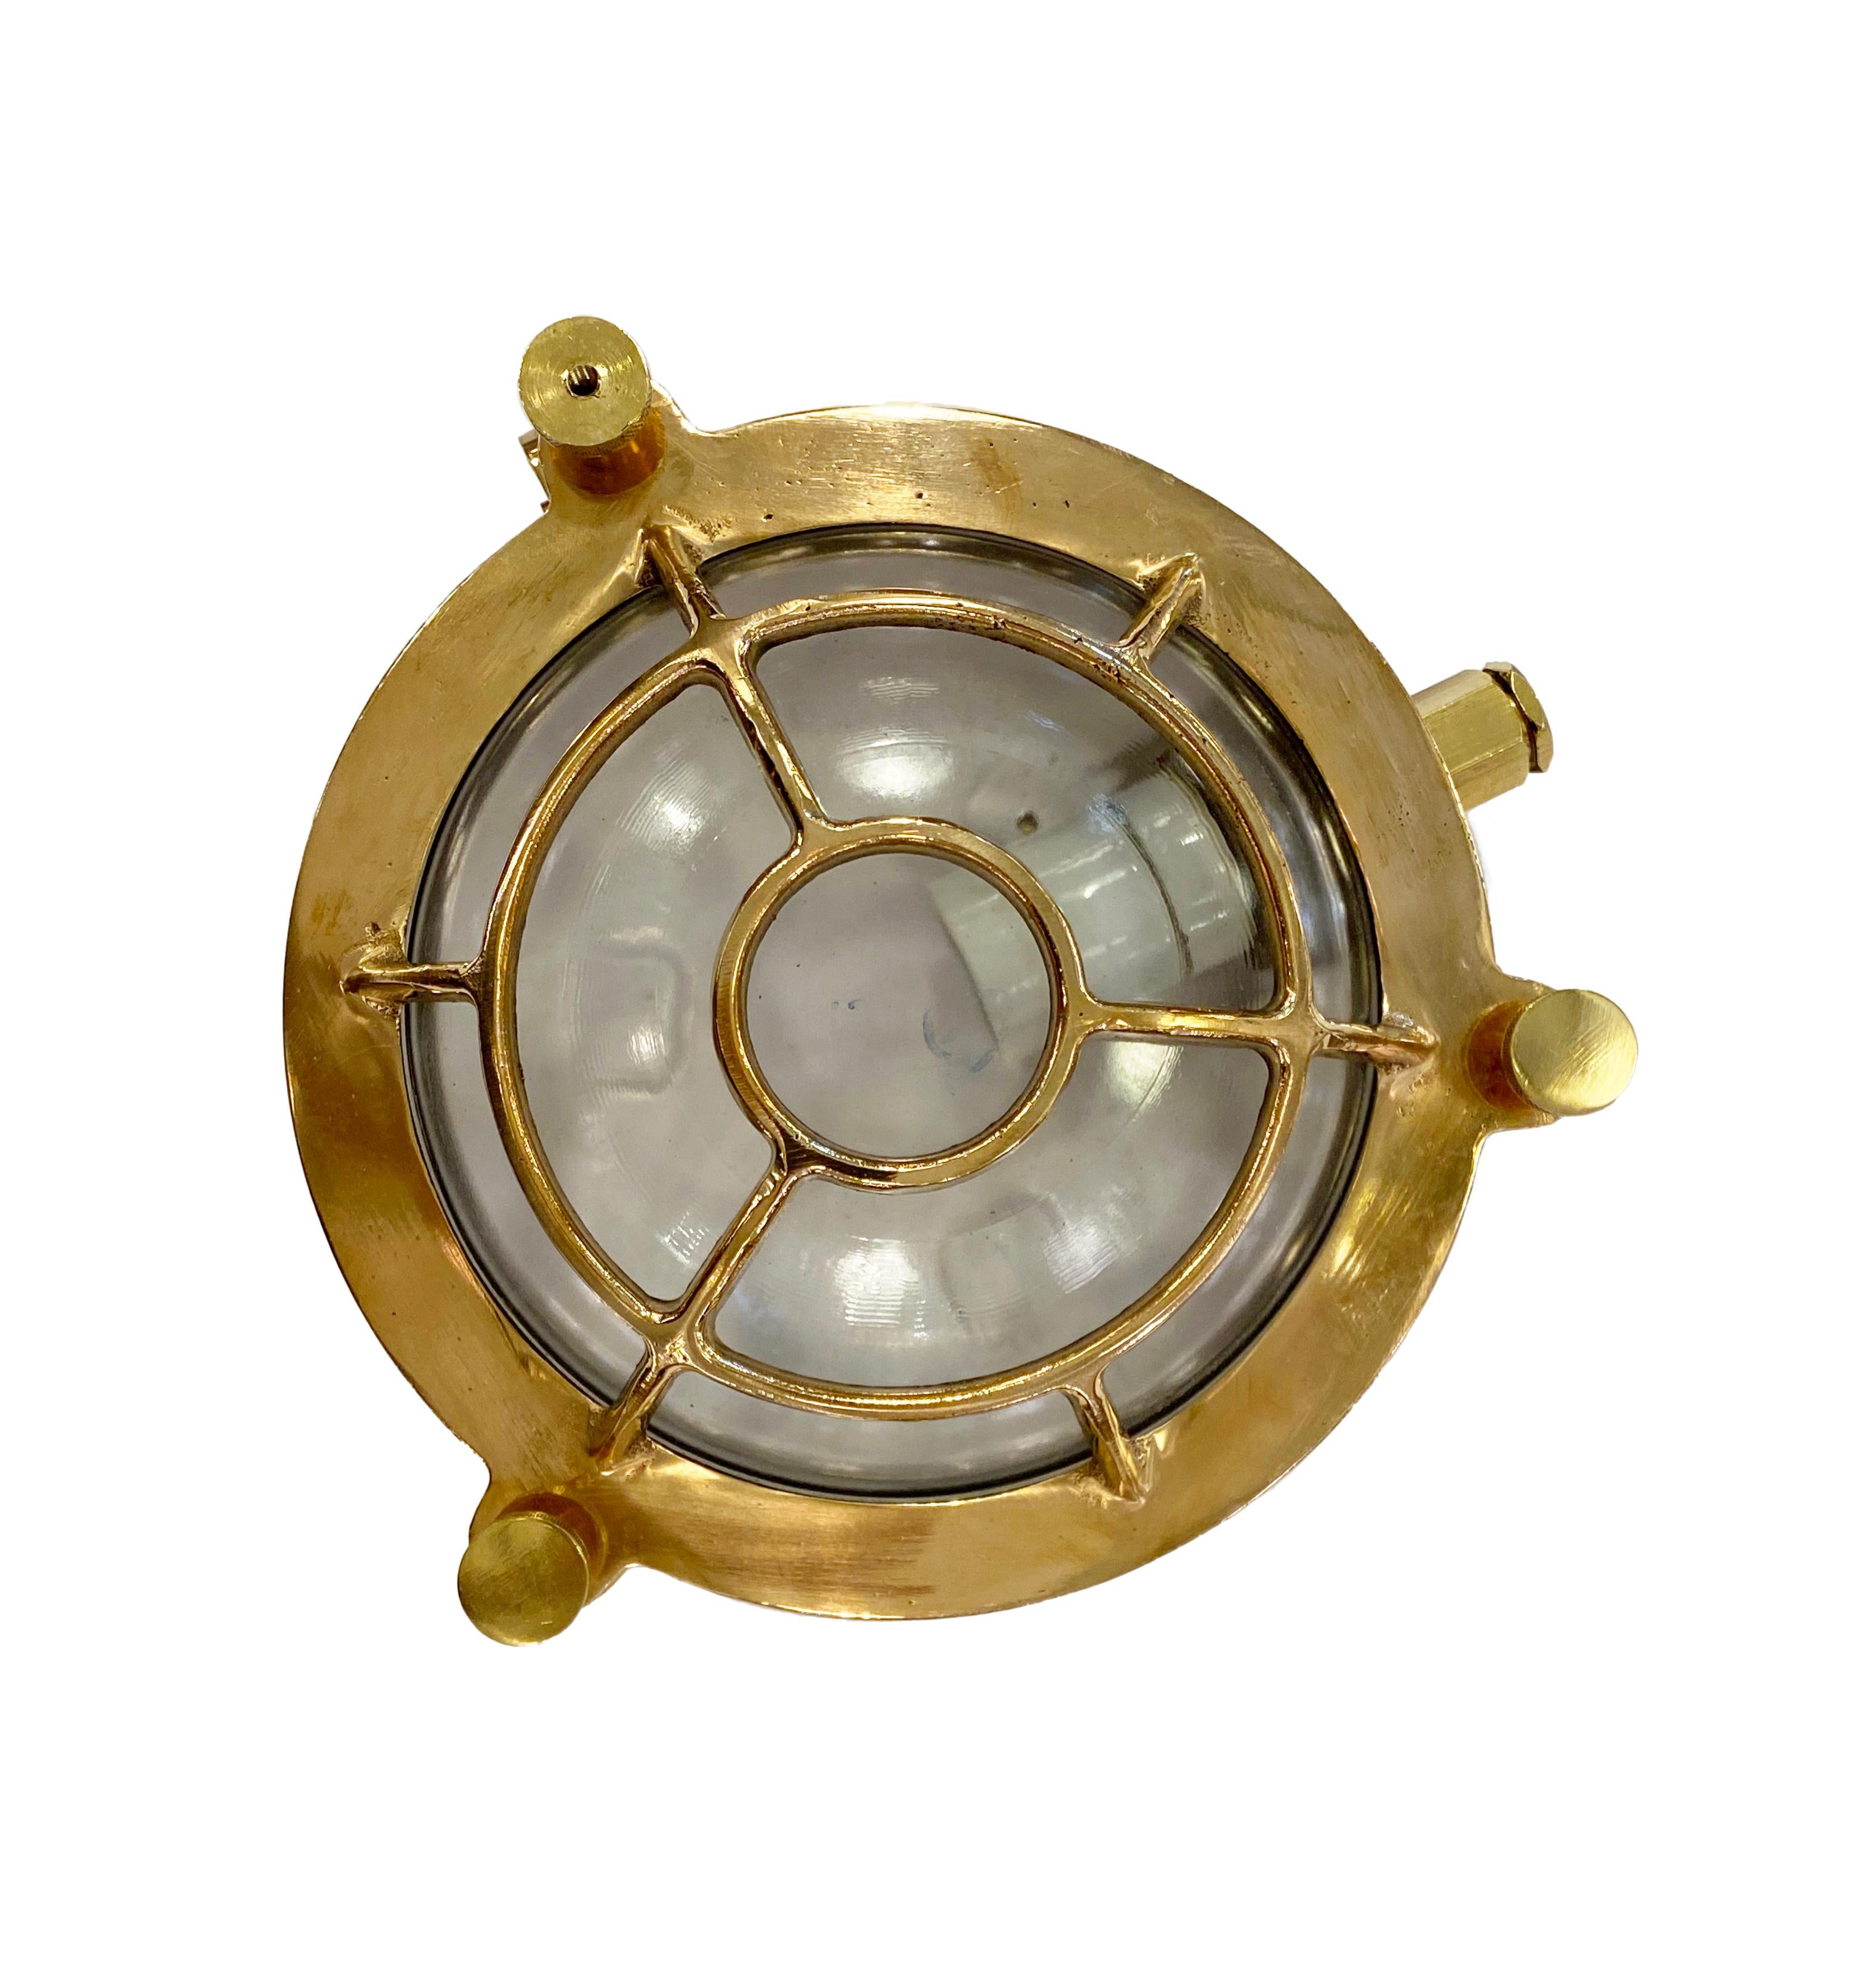 Cast brass round nautical bulkhead ship light. Newly wired and takes one E26 household medium base light bulb. Can be used either as a ceiling light or wall sconce. With new industrial rubber gasket. Cleaned and rewired. Small quantity available at